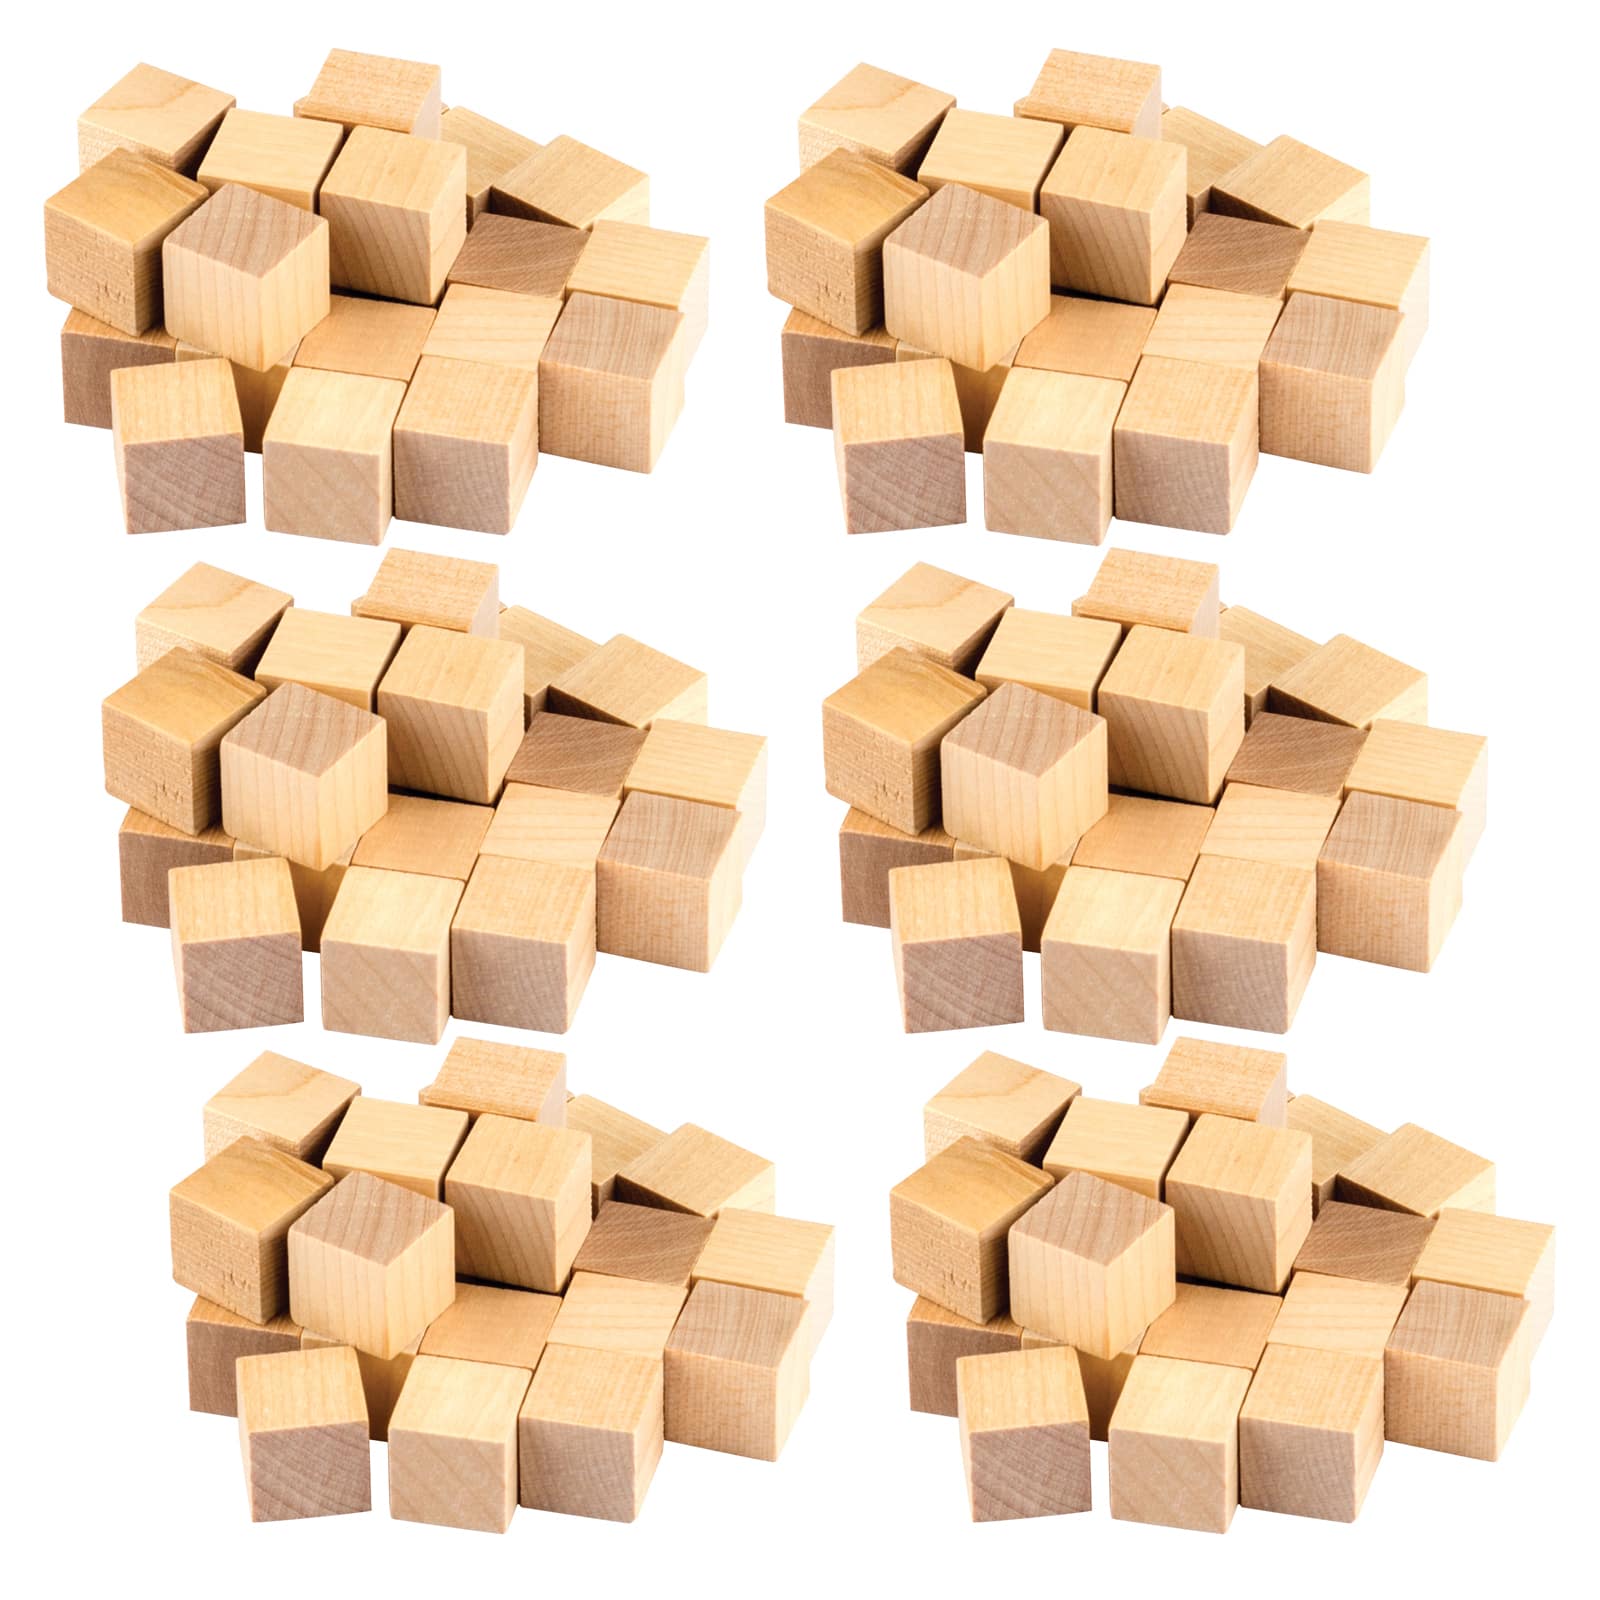 6 Packs: 6 Packs 25 ct. (900 total) Teacher Created Resources STEM Basics Wooden Cubes